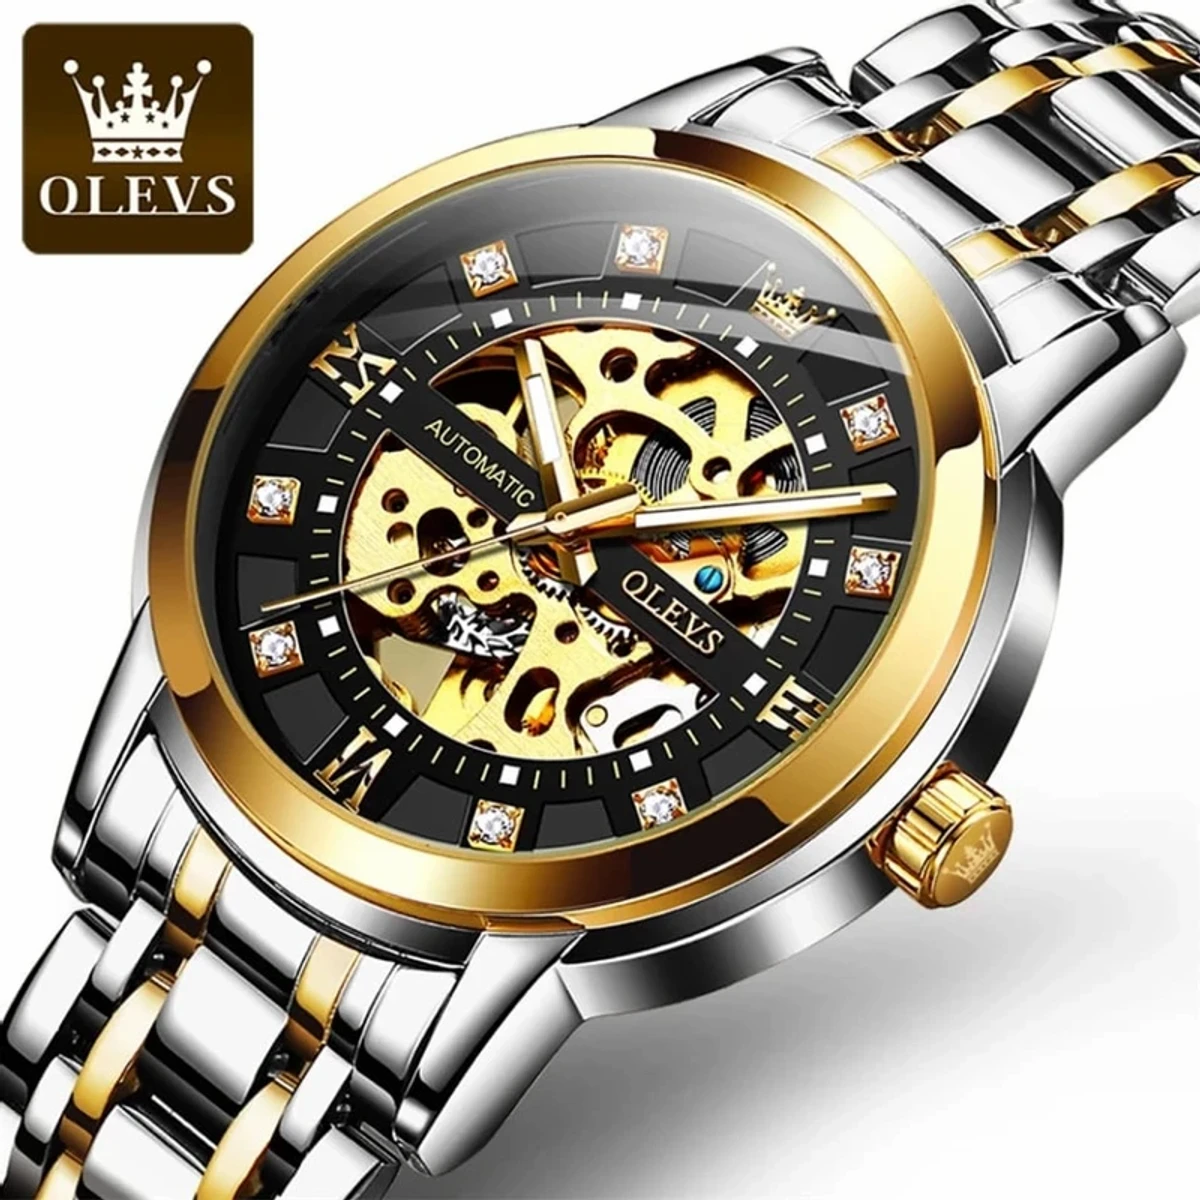 OLEVS MODEL 9901 MEN’S WATCH AUTOMATIC BUSINESS FASHION WATERPROOF MECHANICAL LUMINOUS STAINLESS STEEL WATCH FOR MEN -  TOTON AR DIAL BLACK COOLER WATCH